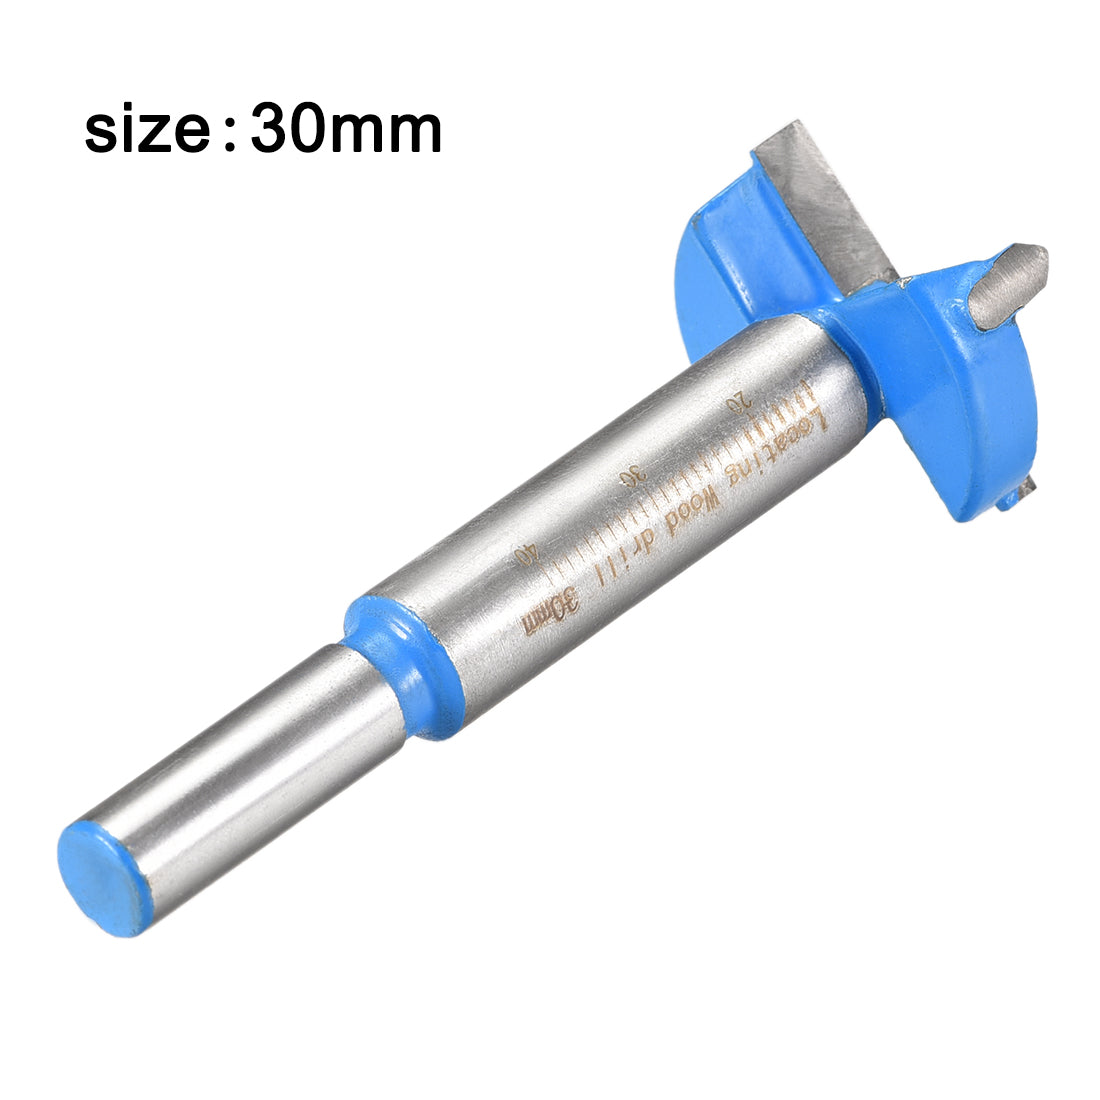 uxcell Uxcell Forstner Wood Boring Drill Bit 30mm Dia. Hole Saw Carbide Alloy Steel Tip Round Shank Cutting for Hinge Plywood Wood Tool Blue 1Set